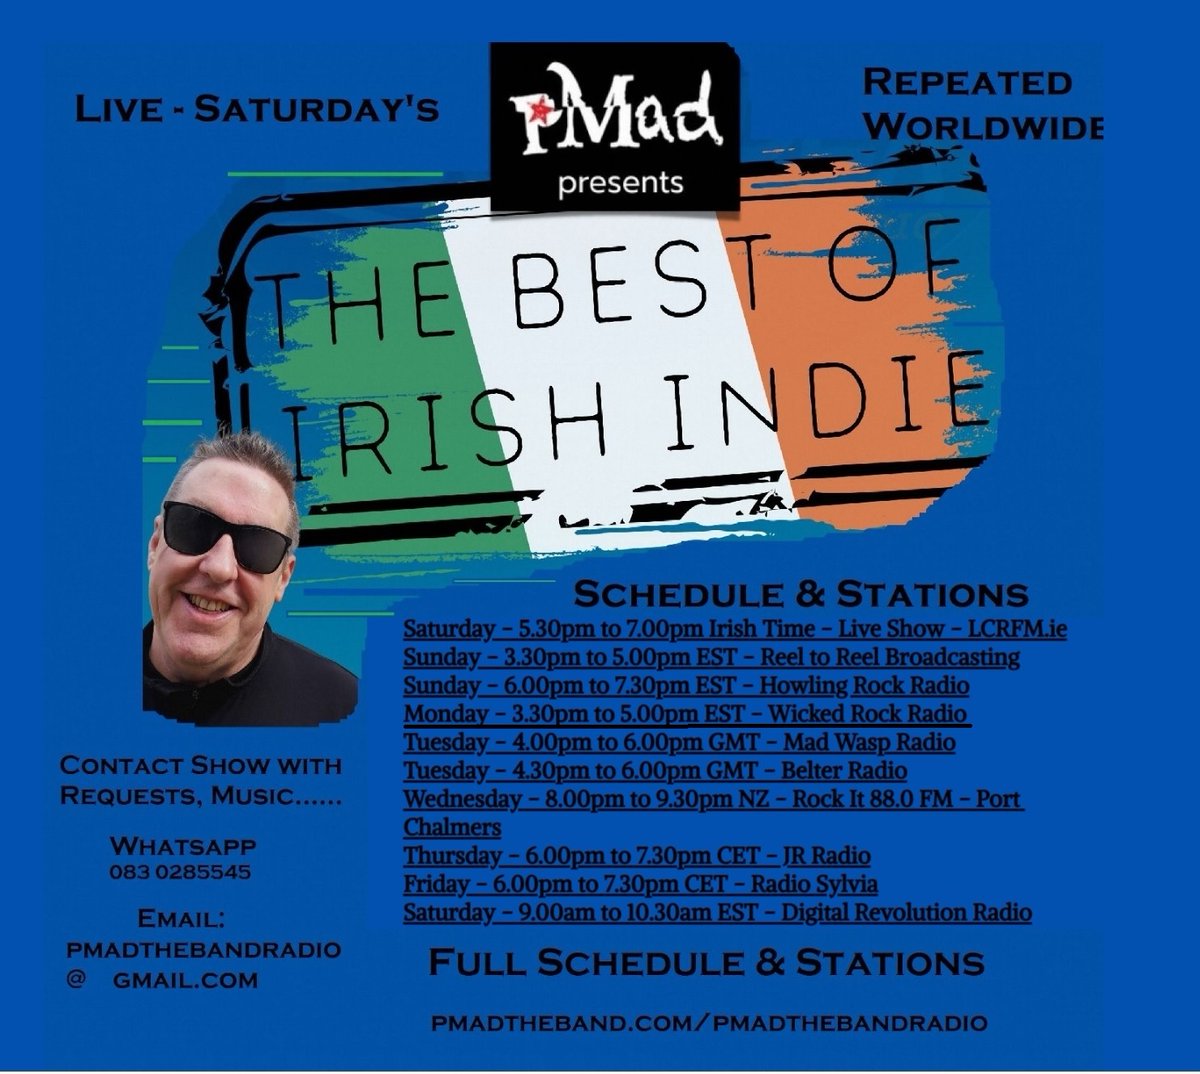 LIVE NOW #TheBestofIrishIndie #RadioShow on Saturday & every Saturday with @pmadtheband on lcrfm.ie Show thread moved to Insta, FB has gone mad!! Check out full schedule of shows here: pmadtheband.com/pmadthebandrad…